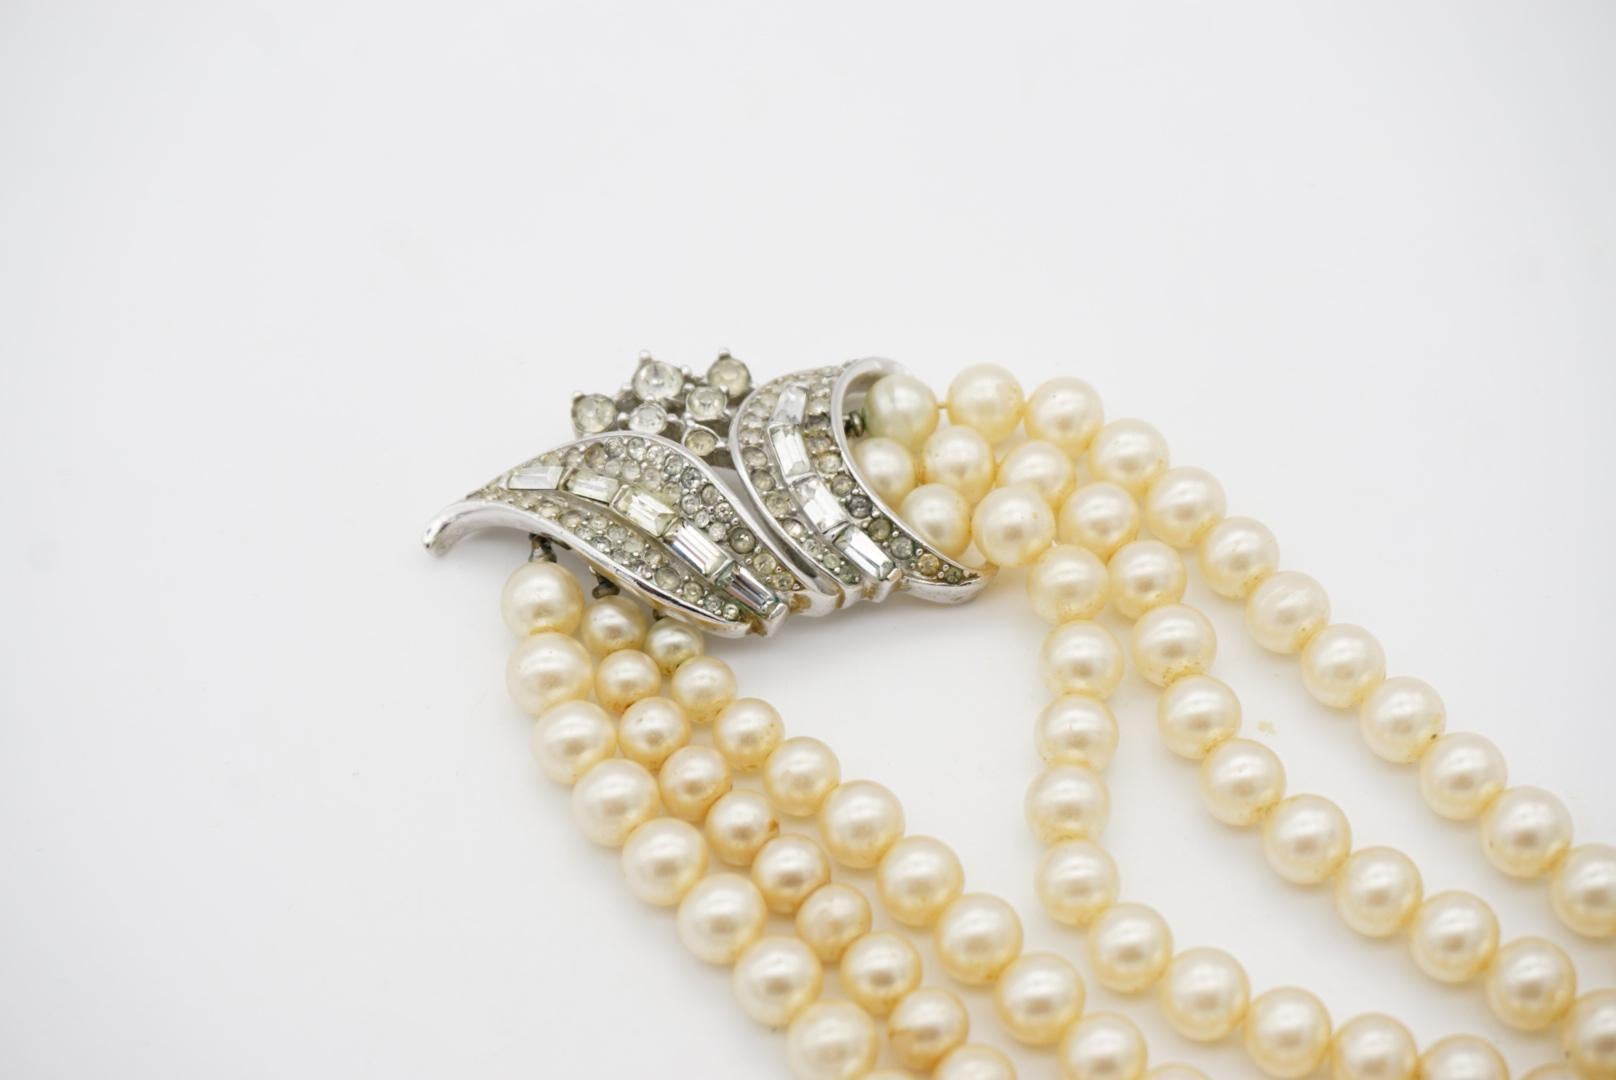 Crown Trifari 1940s Trio Strands Layer Pearls Crystals Pendant Choker Necklace For Sale 7